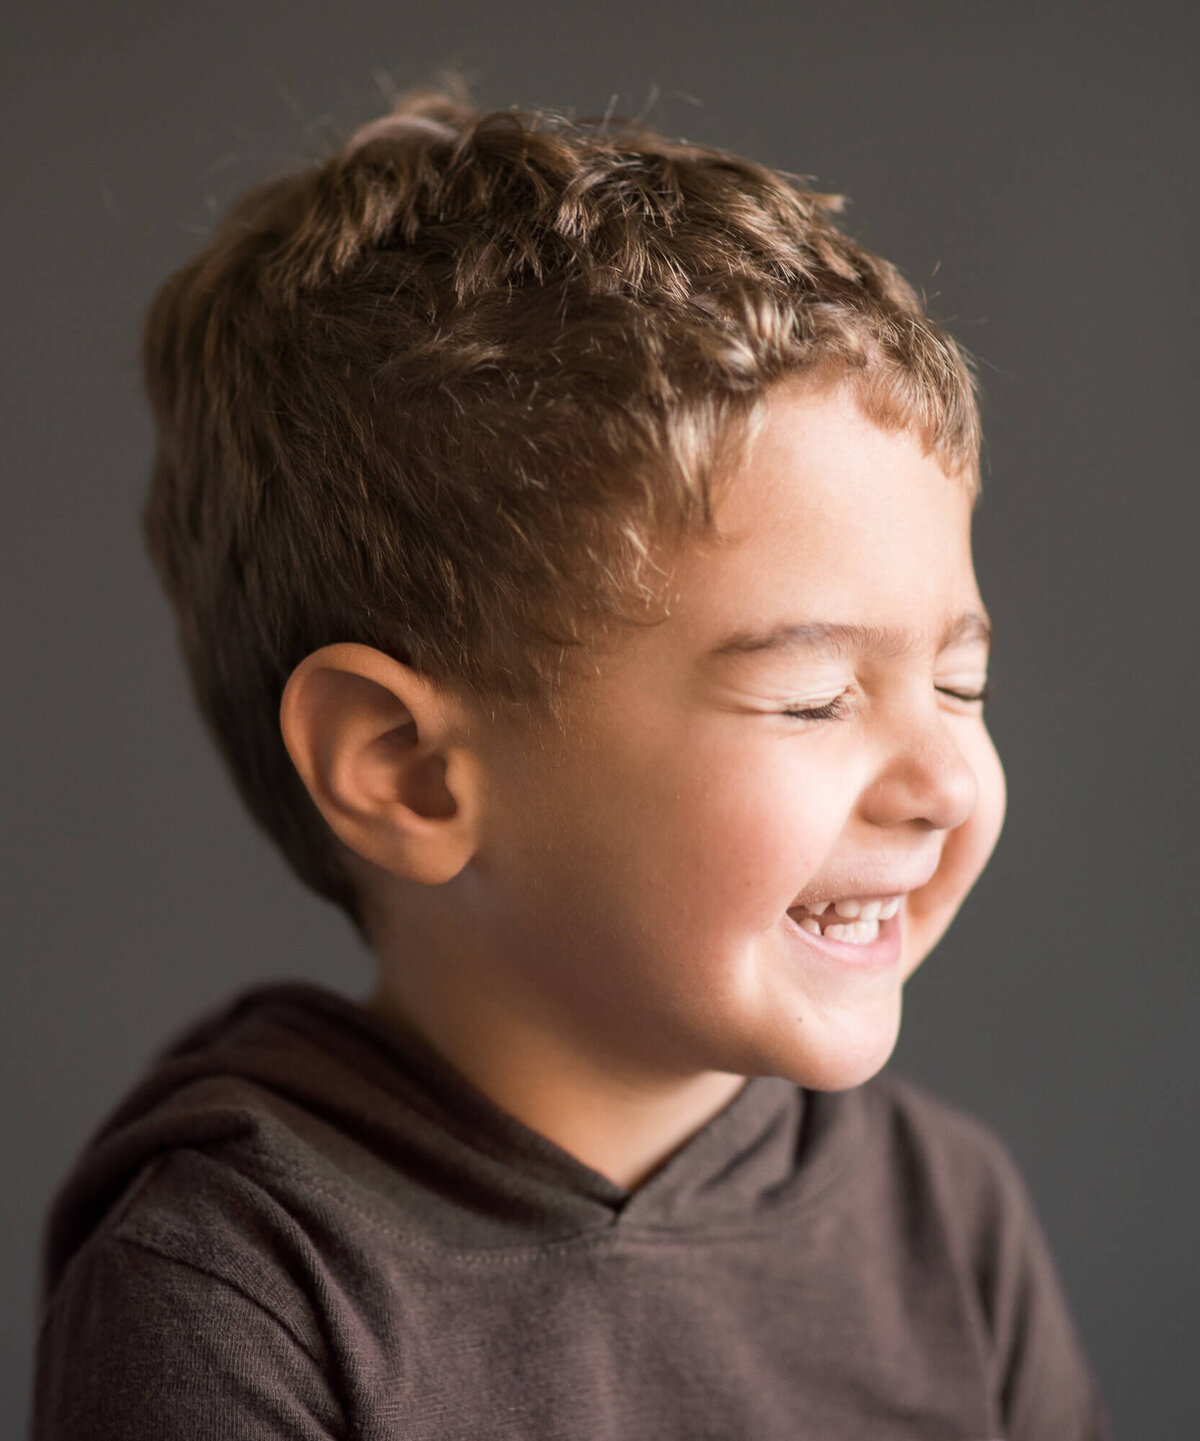 super cute little boy  profile of his face while laughing with eyes closed, grey backdrop studio portrait